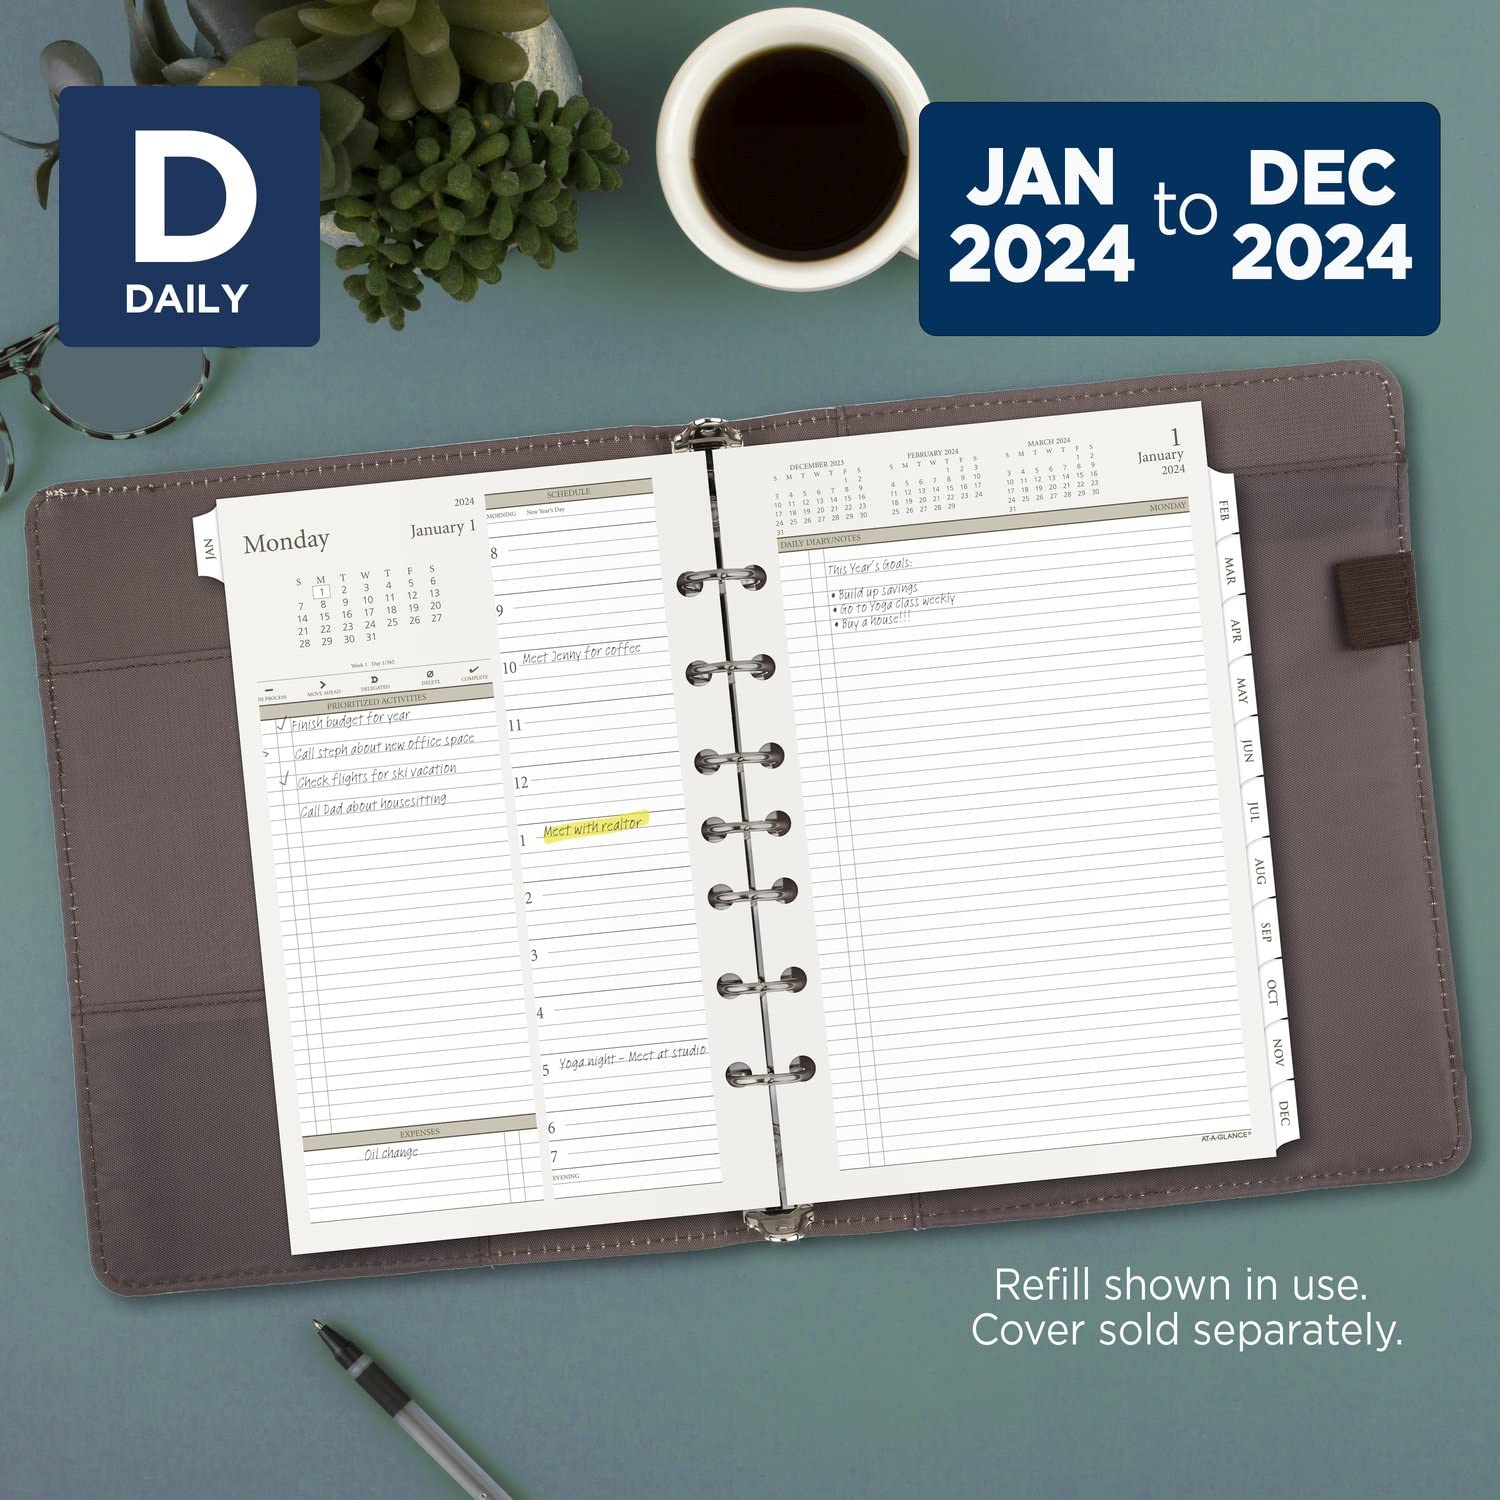 AT-A-GLANCE 2024 Daily Planner Two Page Per Day Refill, 5-1/2" x 8-1/2", Desk Size, Loose-Leaf (481-225-24)